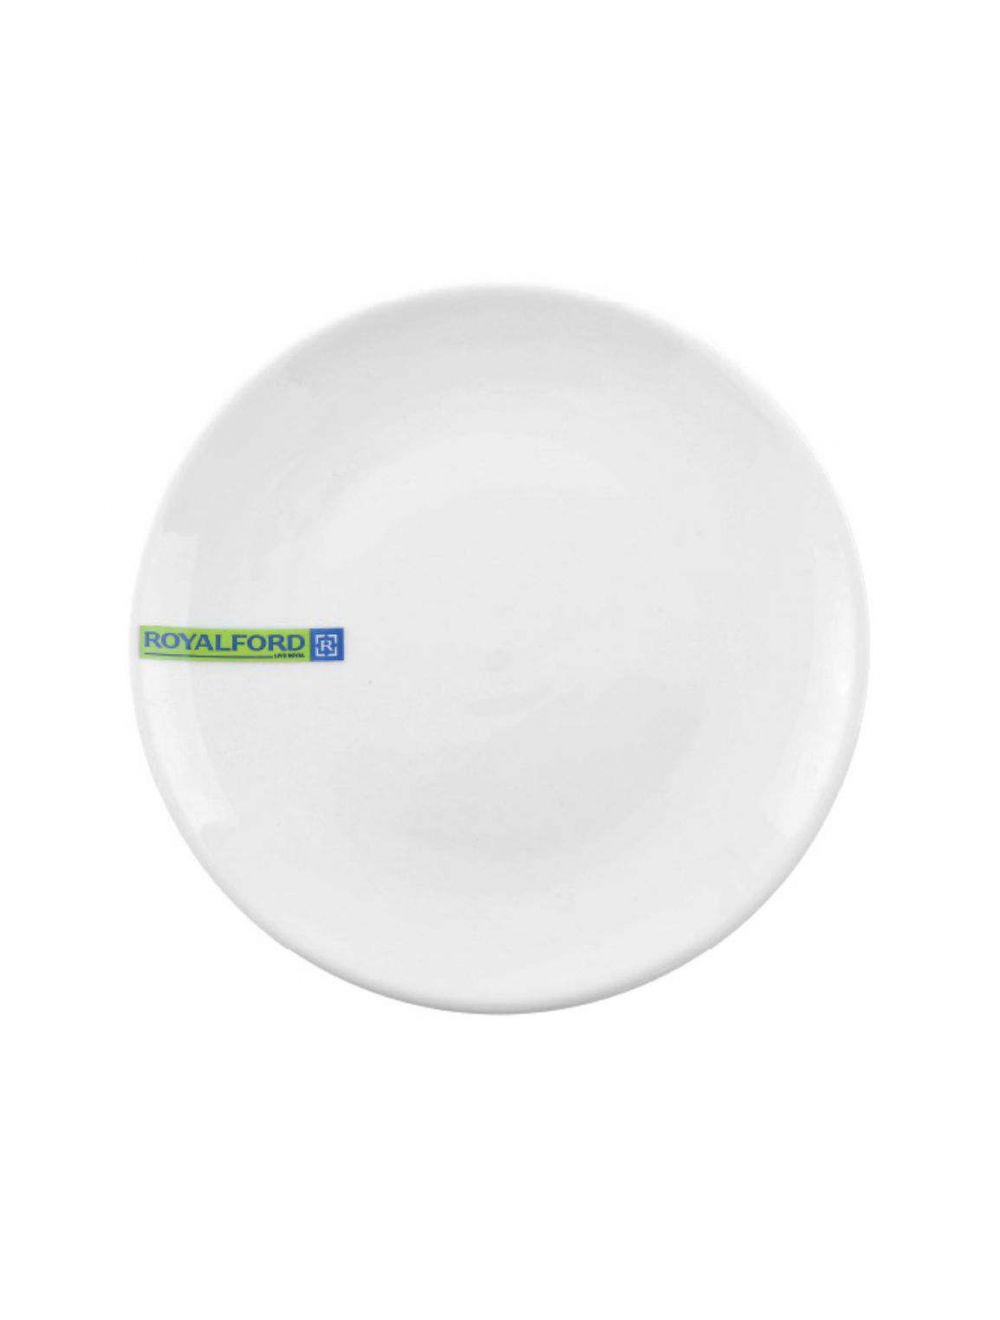 Royalford RF7997 Porcelain Magnesia Flat Plate, 8 Inch